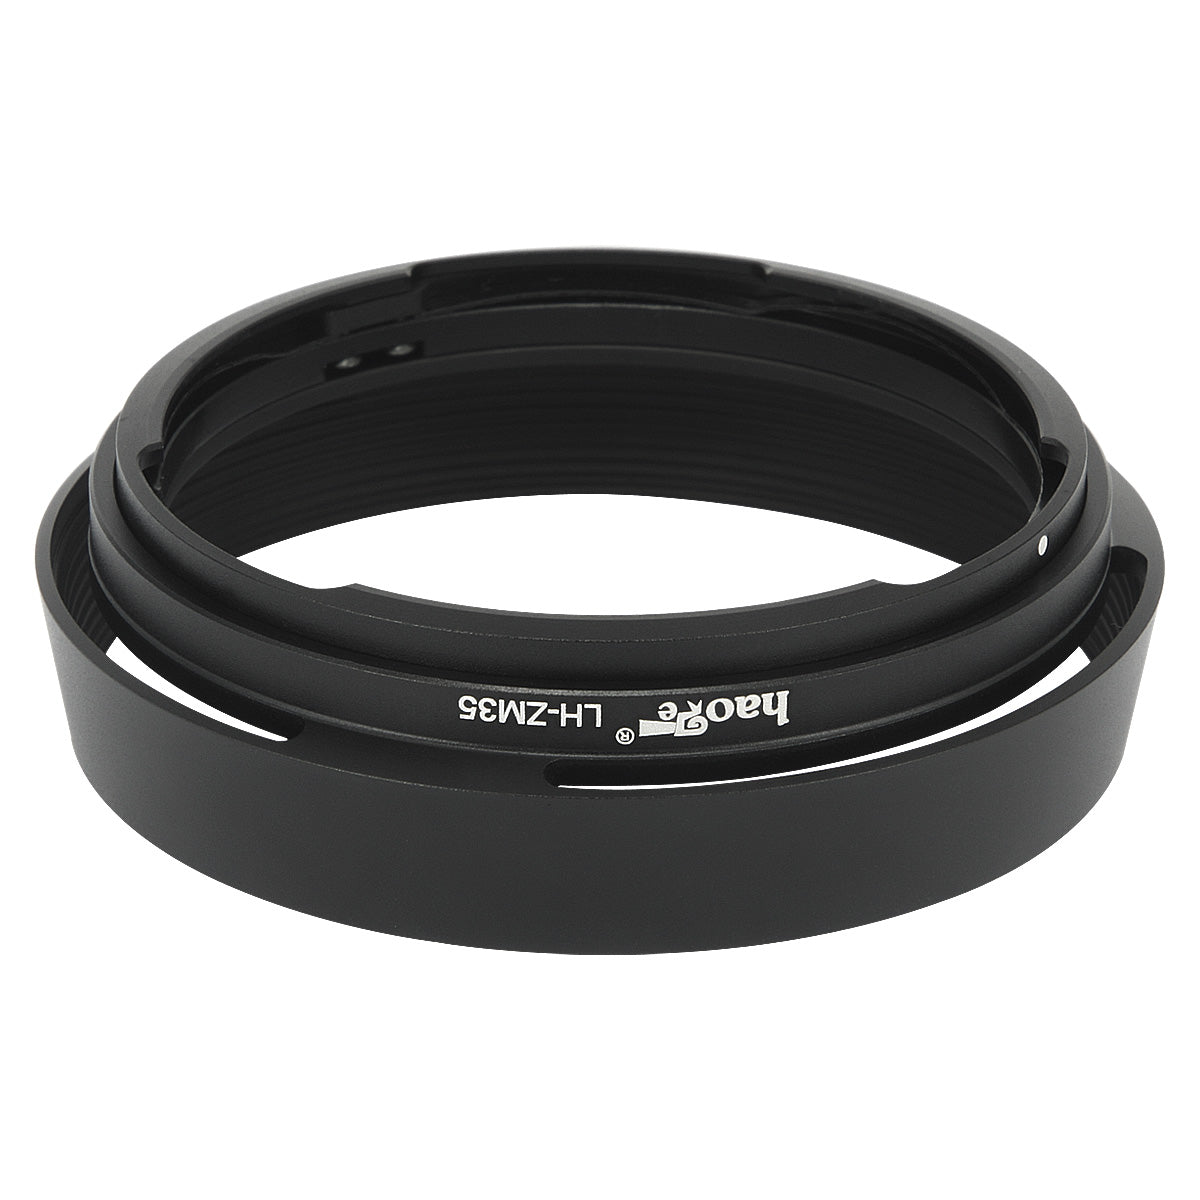 Haoge LH-ZM35 Bayonet Metal Round Lens Hood Shade Compatible with Carl Zeiss Distagon T 1.4/35 35mm f1.4 ZM Lens Black